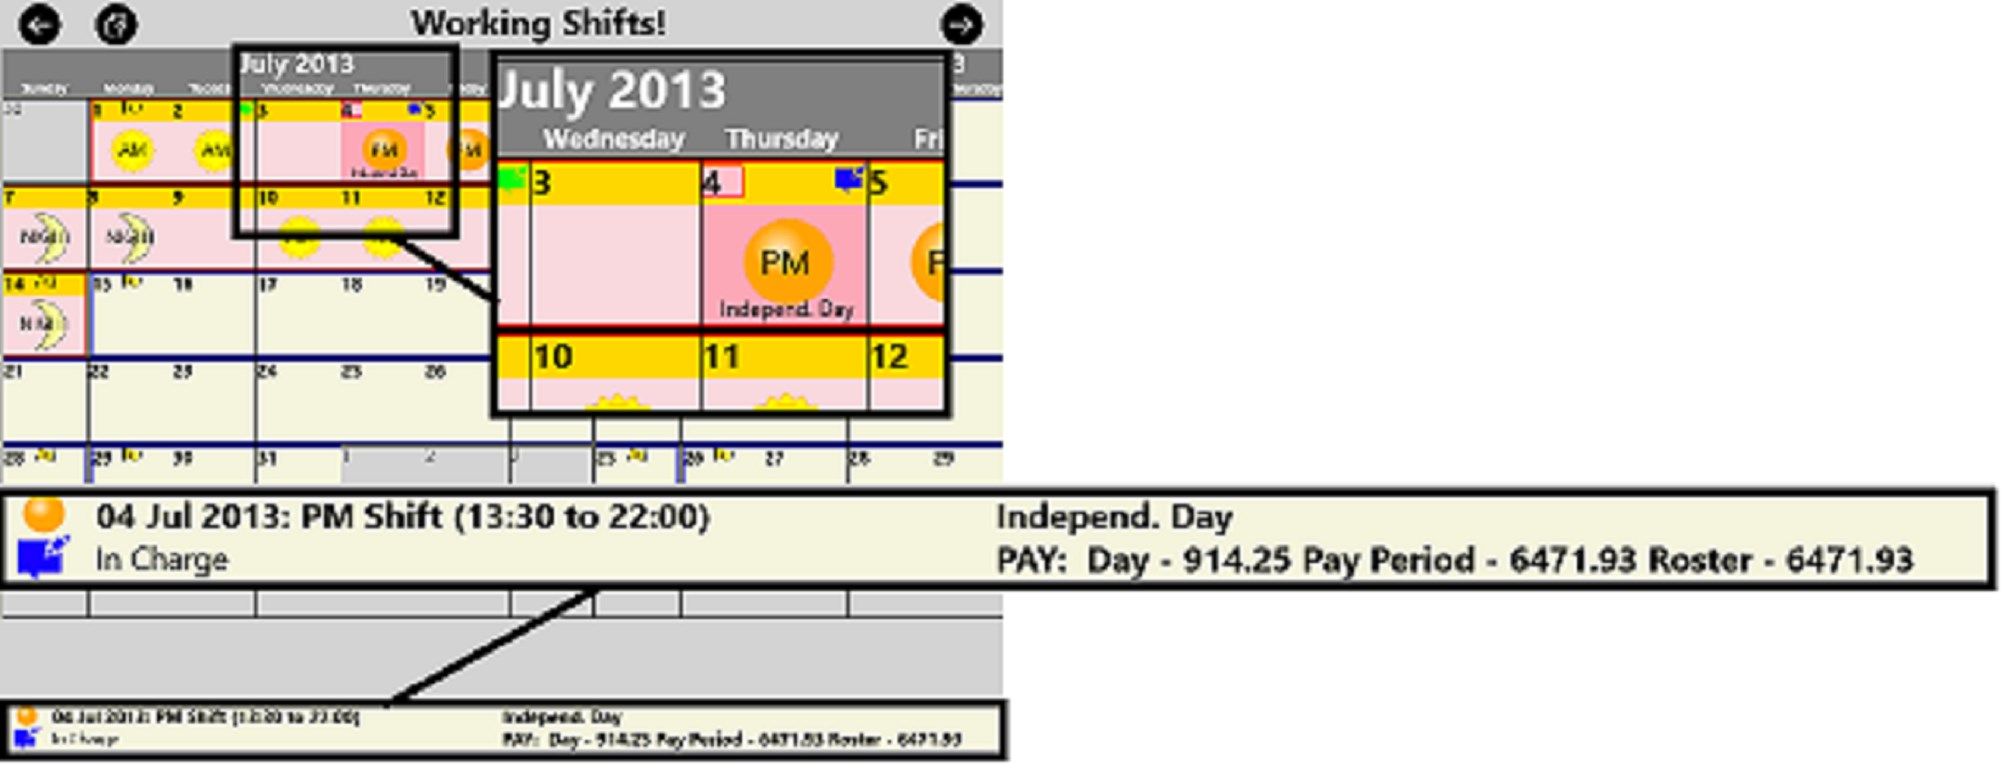 Select a shift on your calendar and see the details on the information display - shift start and end time, the pay that you expect to make on that day, the total pay for your roster and pay period.